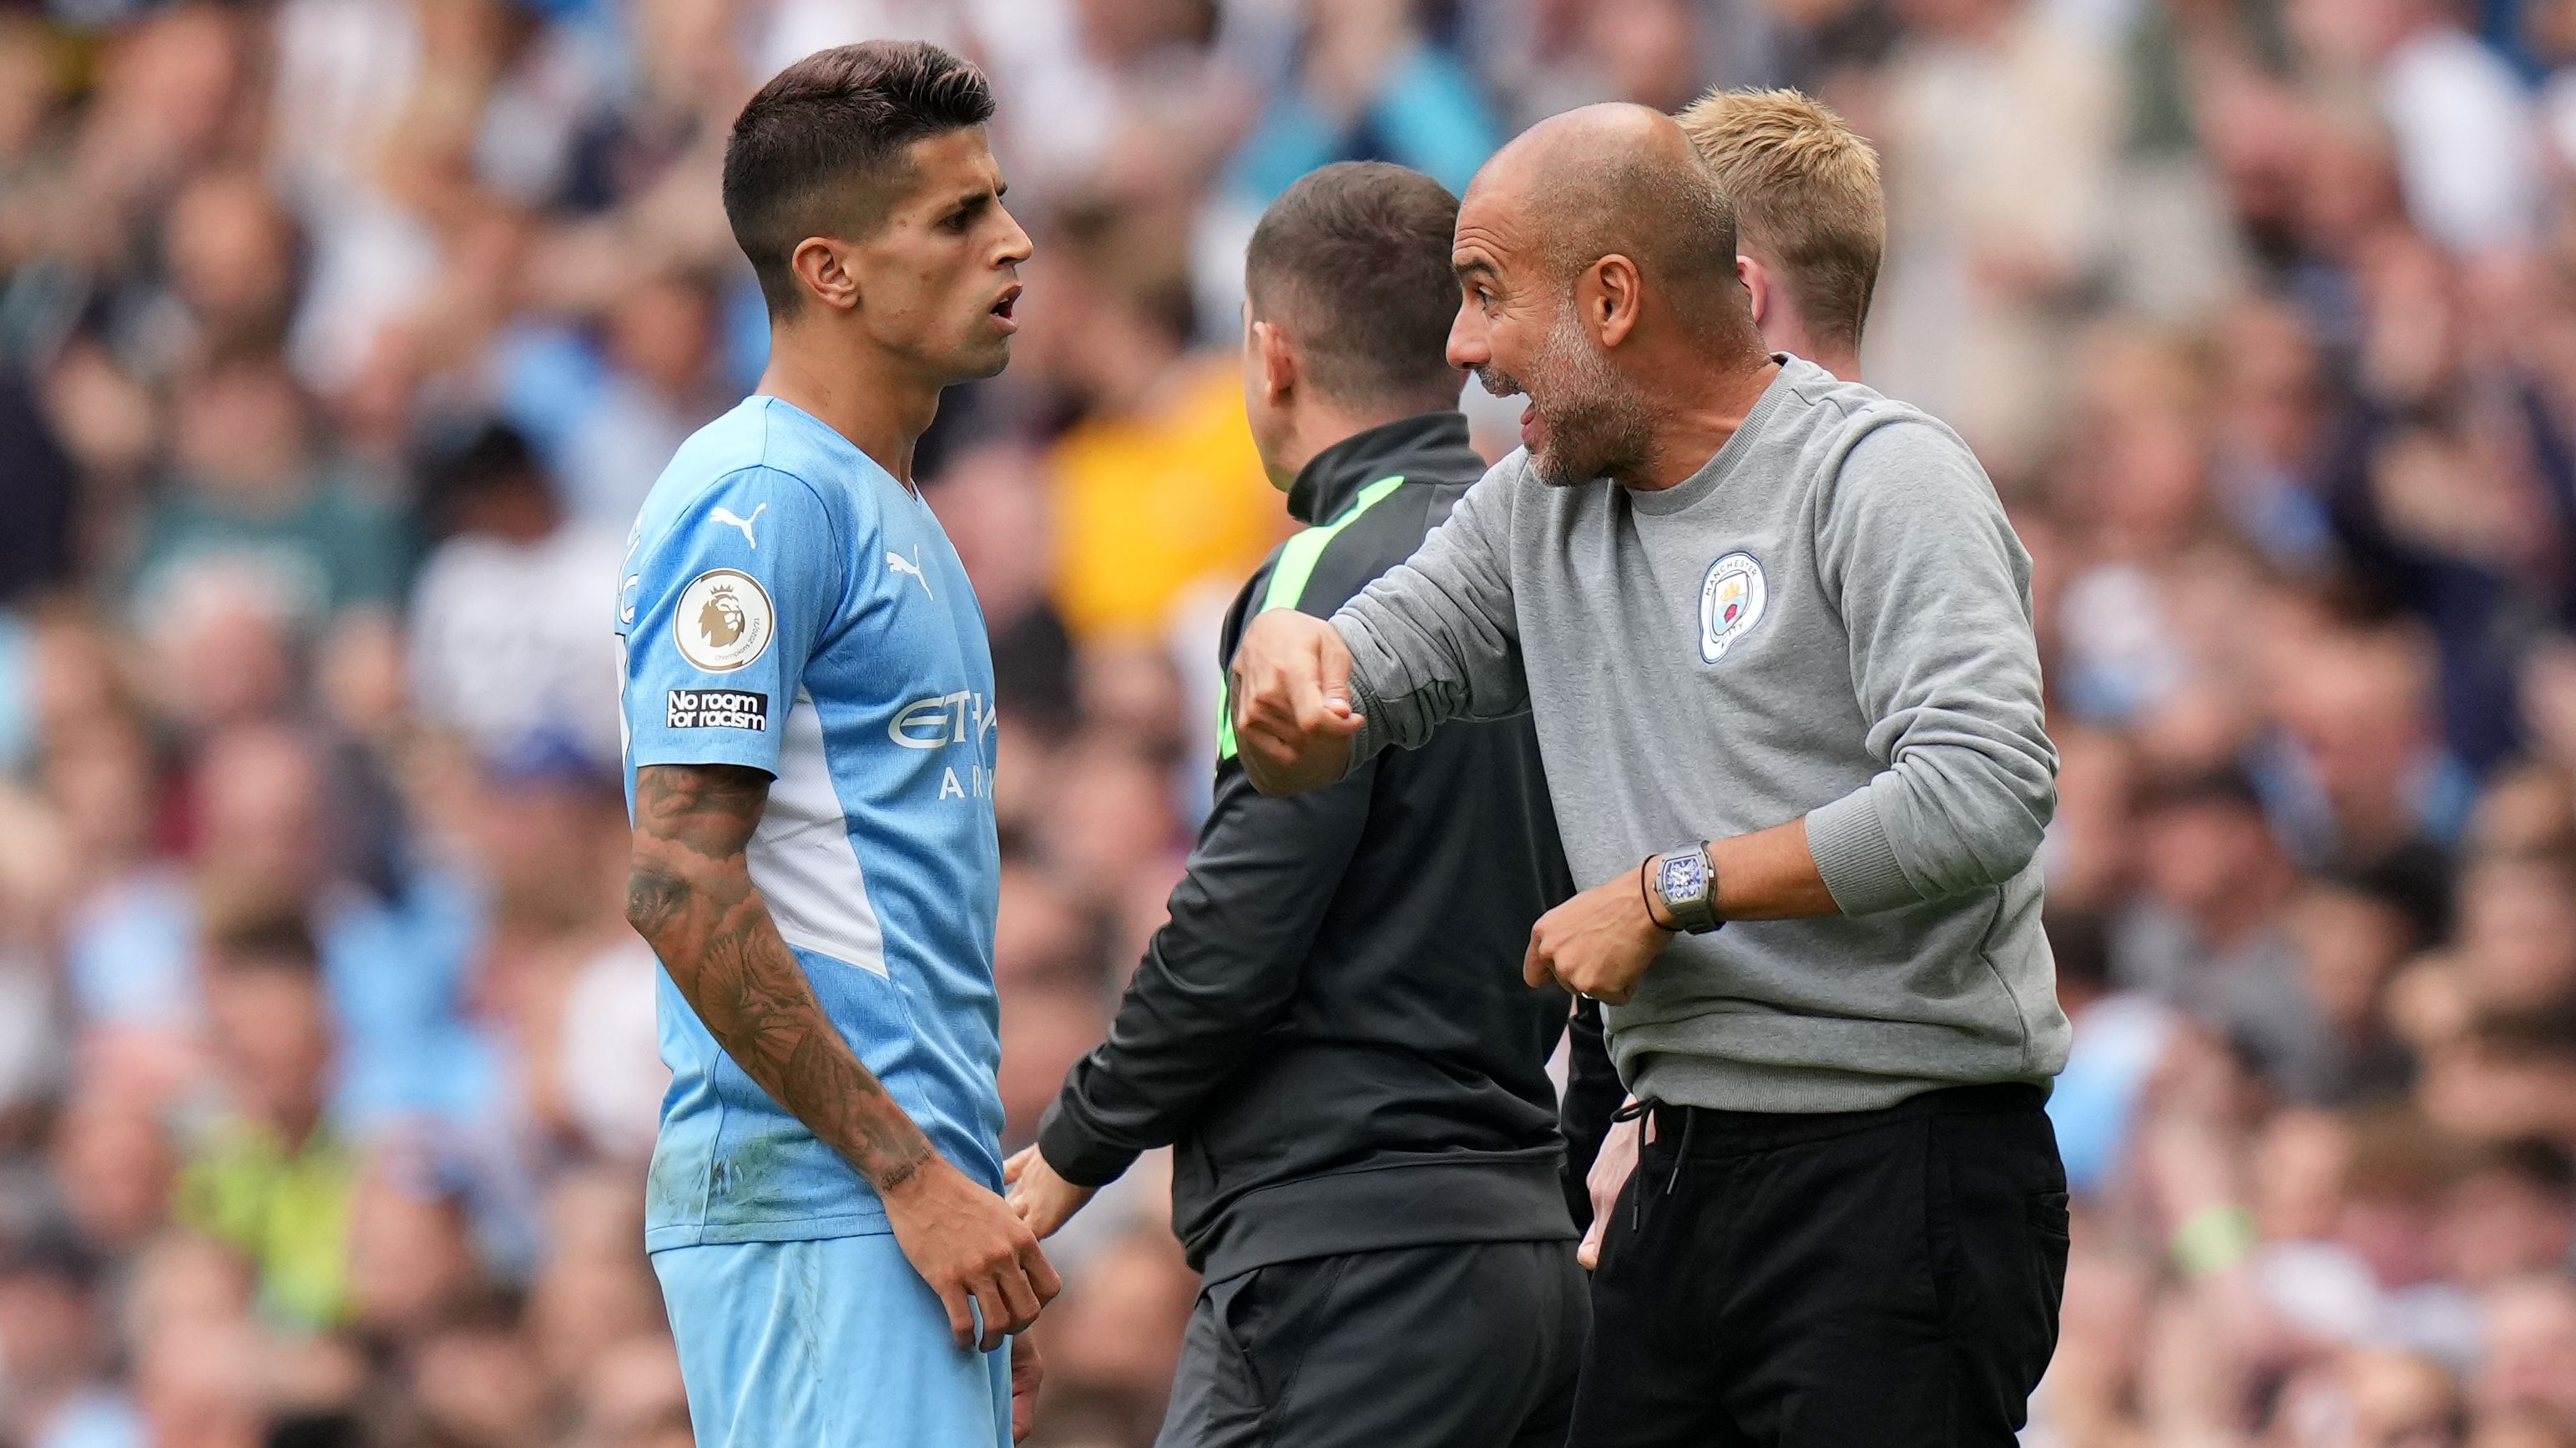 Pep Guardiola, manager of Manchester City talks with Joao Cancelo.